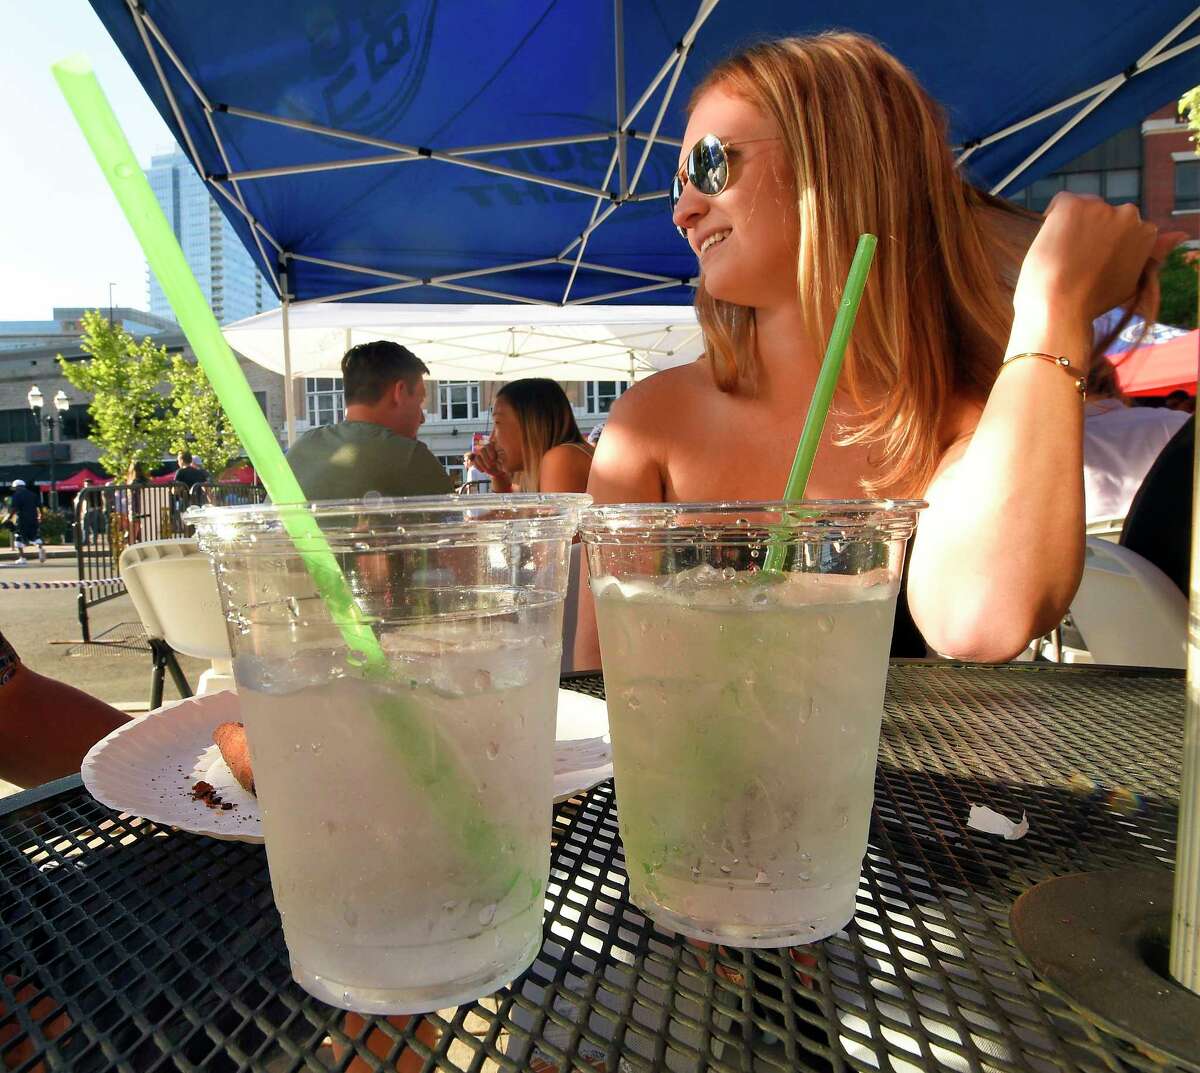 Kelsey Marioni of Stamford relaxes outside having a drink with a friend at Teena’s Apizza, a Stamford restaurant which opened last month, that only uses recyclable products, including totally compostable staws made from plant material, shown in a photograph taken on July 19, 2018 in Stamford, Connecticut.